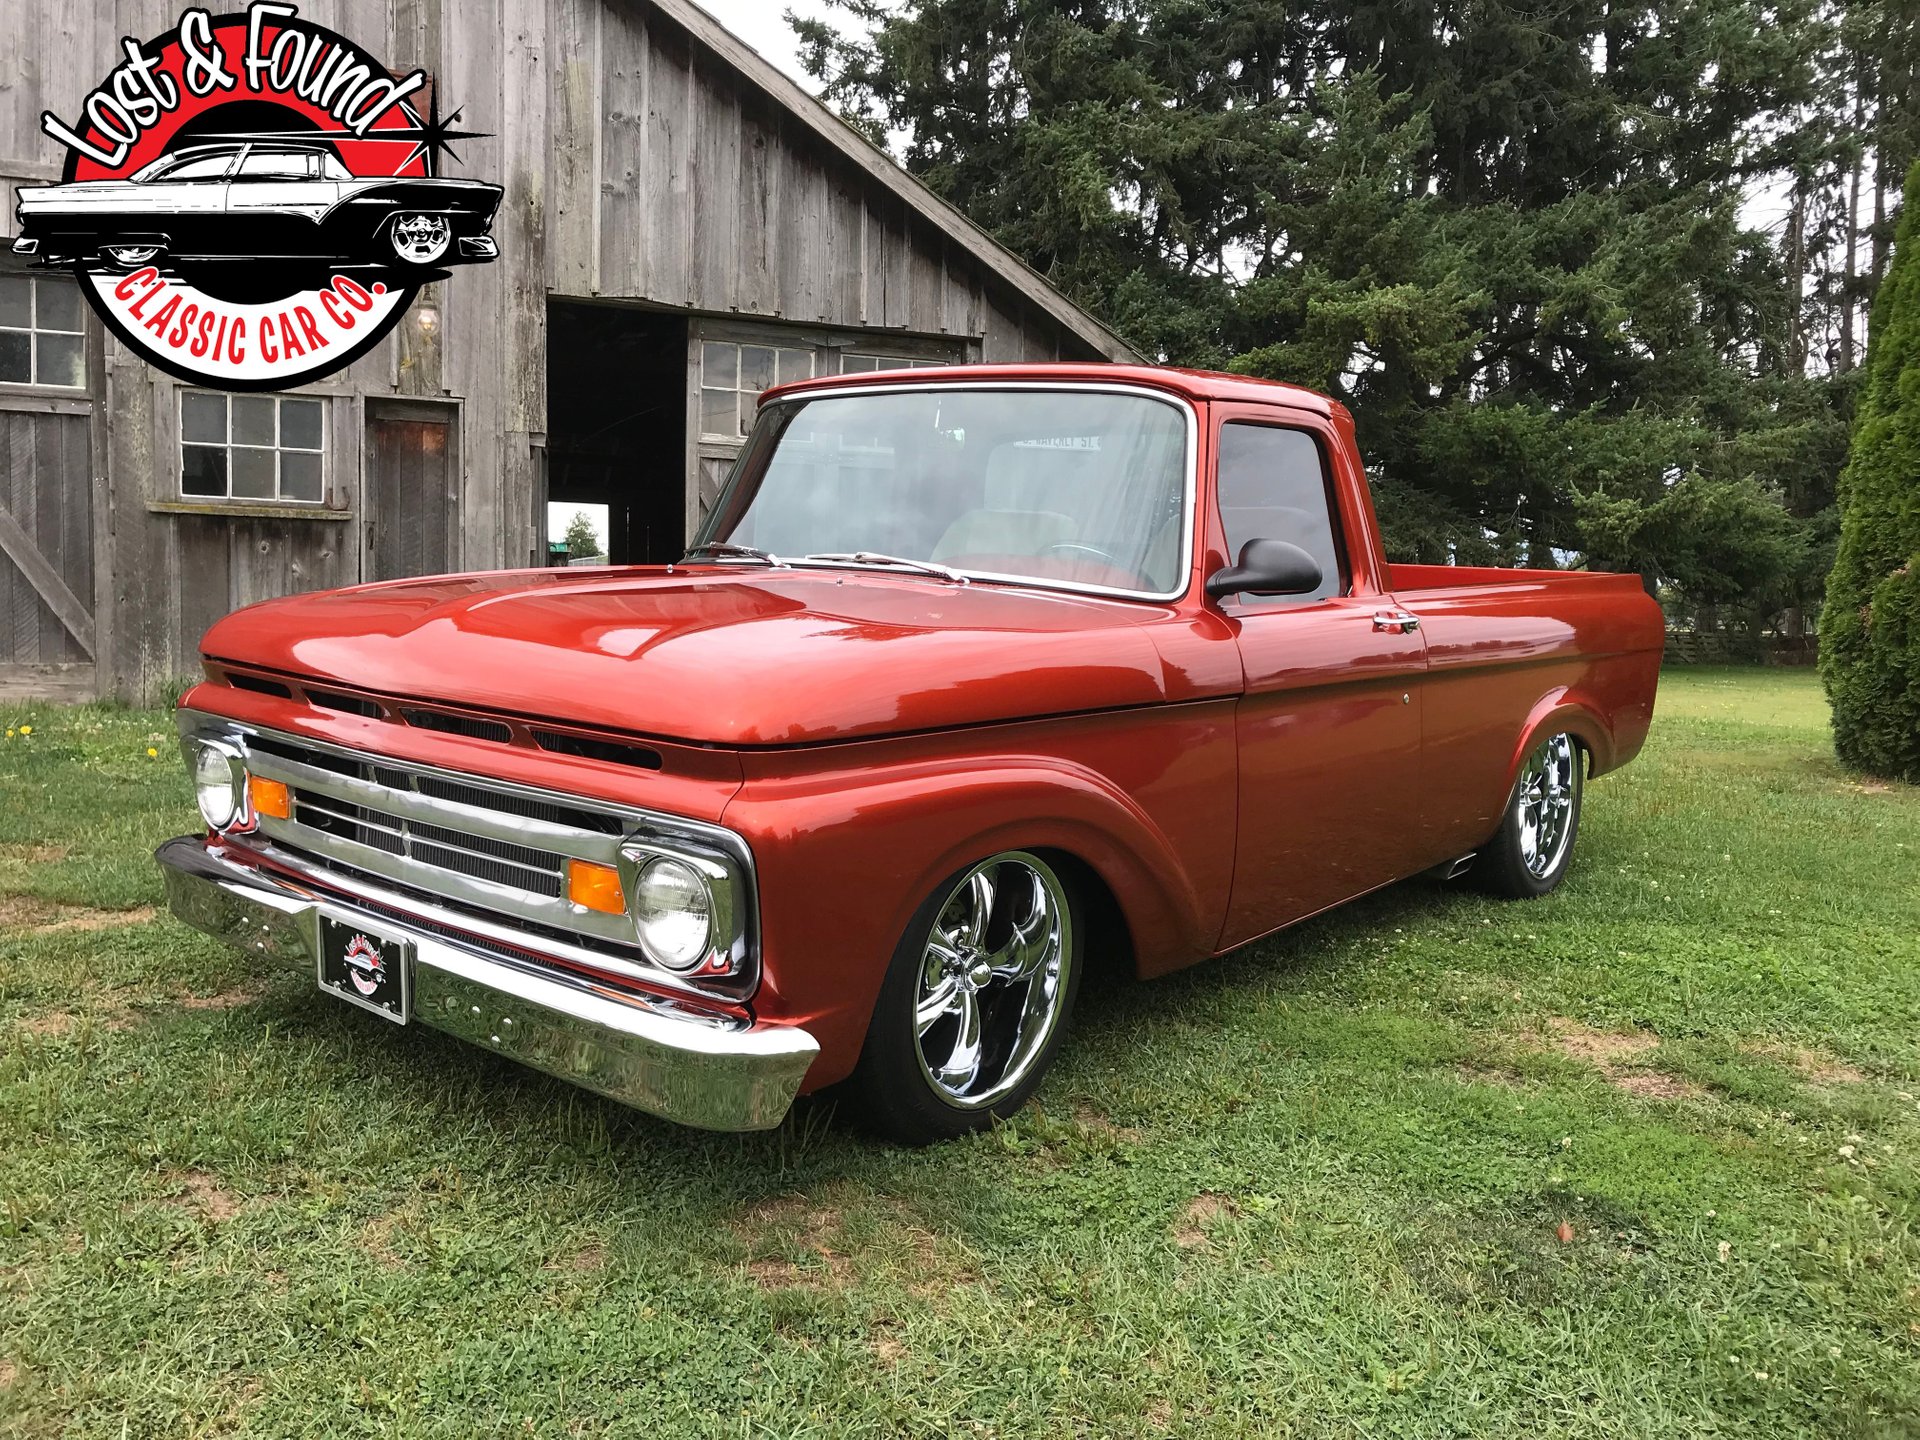 1961 Ford Unibody F100 Pickup Truck | Lost & Found Classic Car Co.